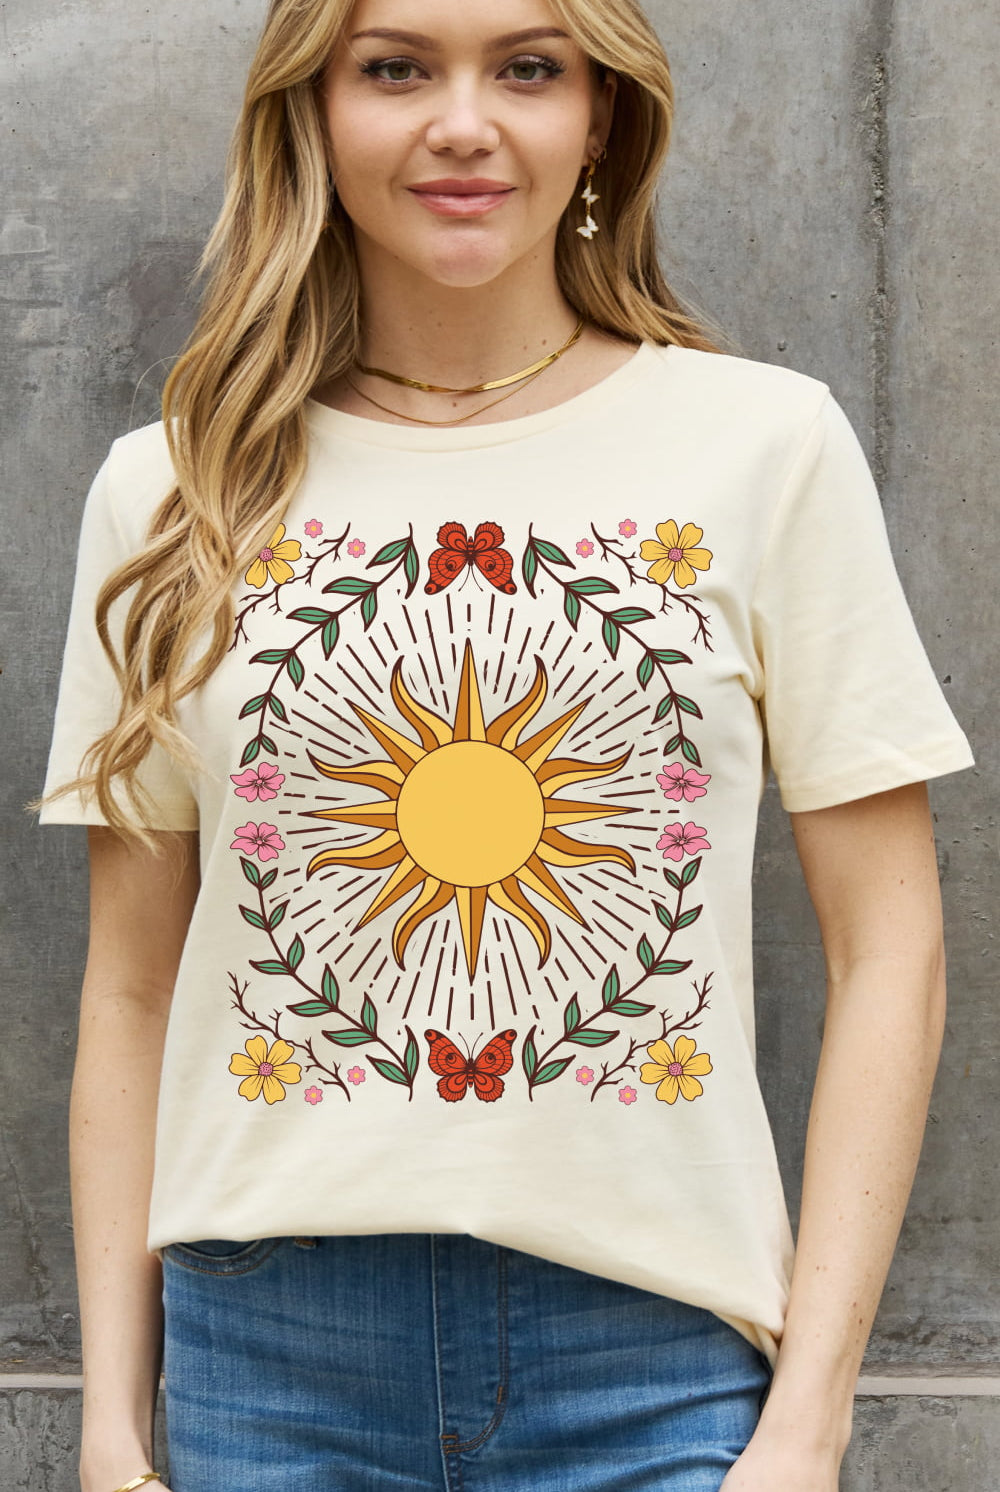 Rosy Brown Simply Love Full Size Sun Graphic Cotton Tee Tops